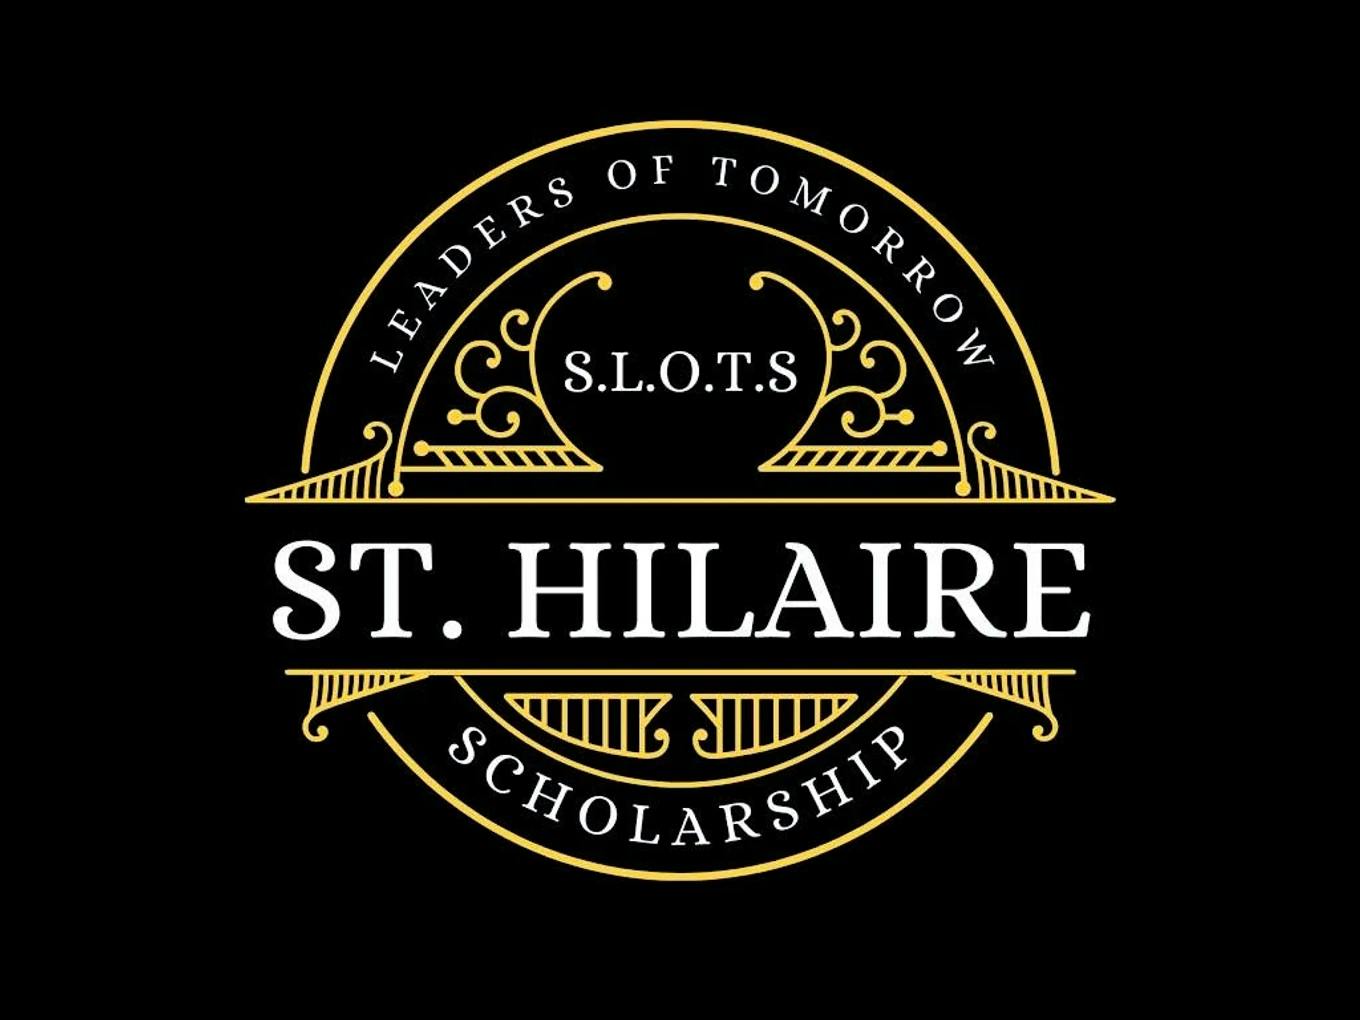 St.Hilaire Leaders of Tomorrow Scholarship Fund